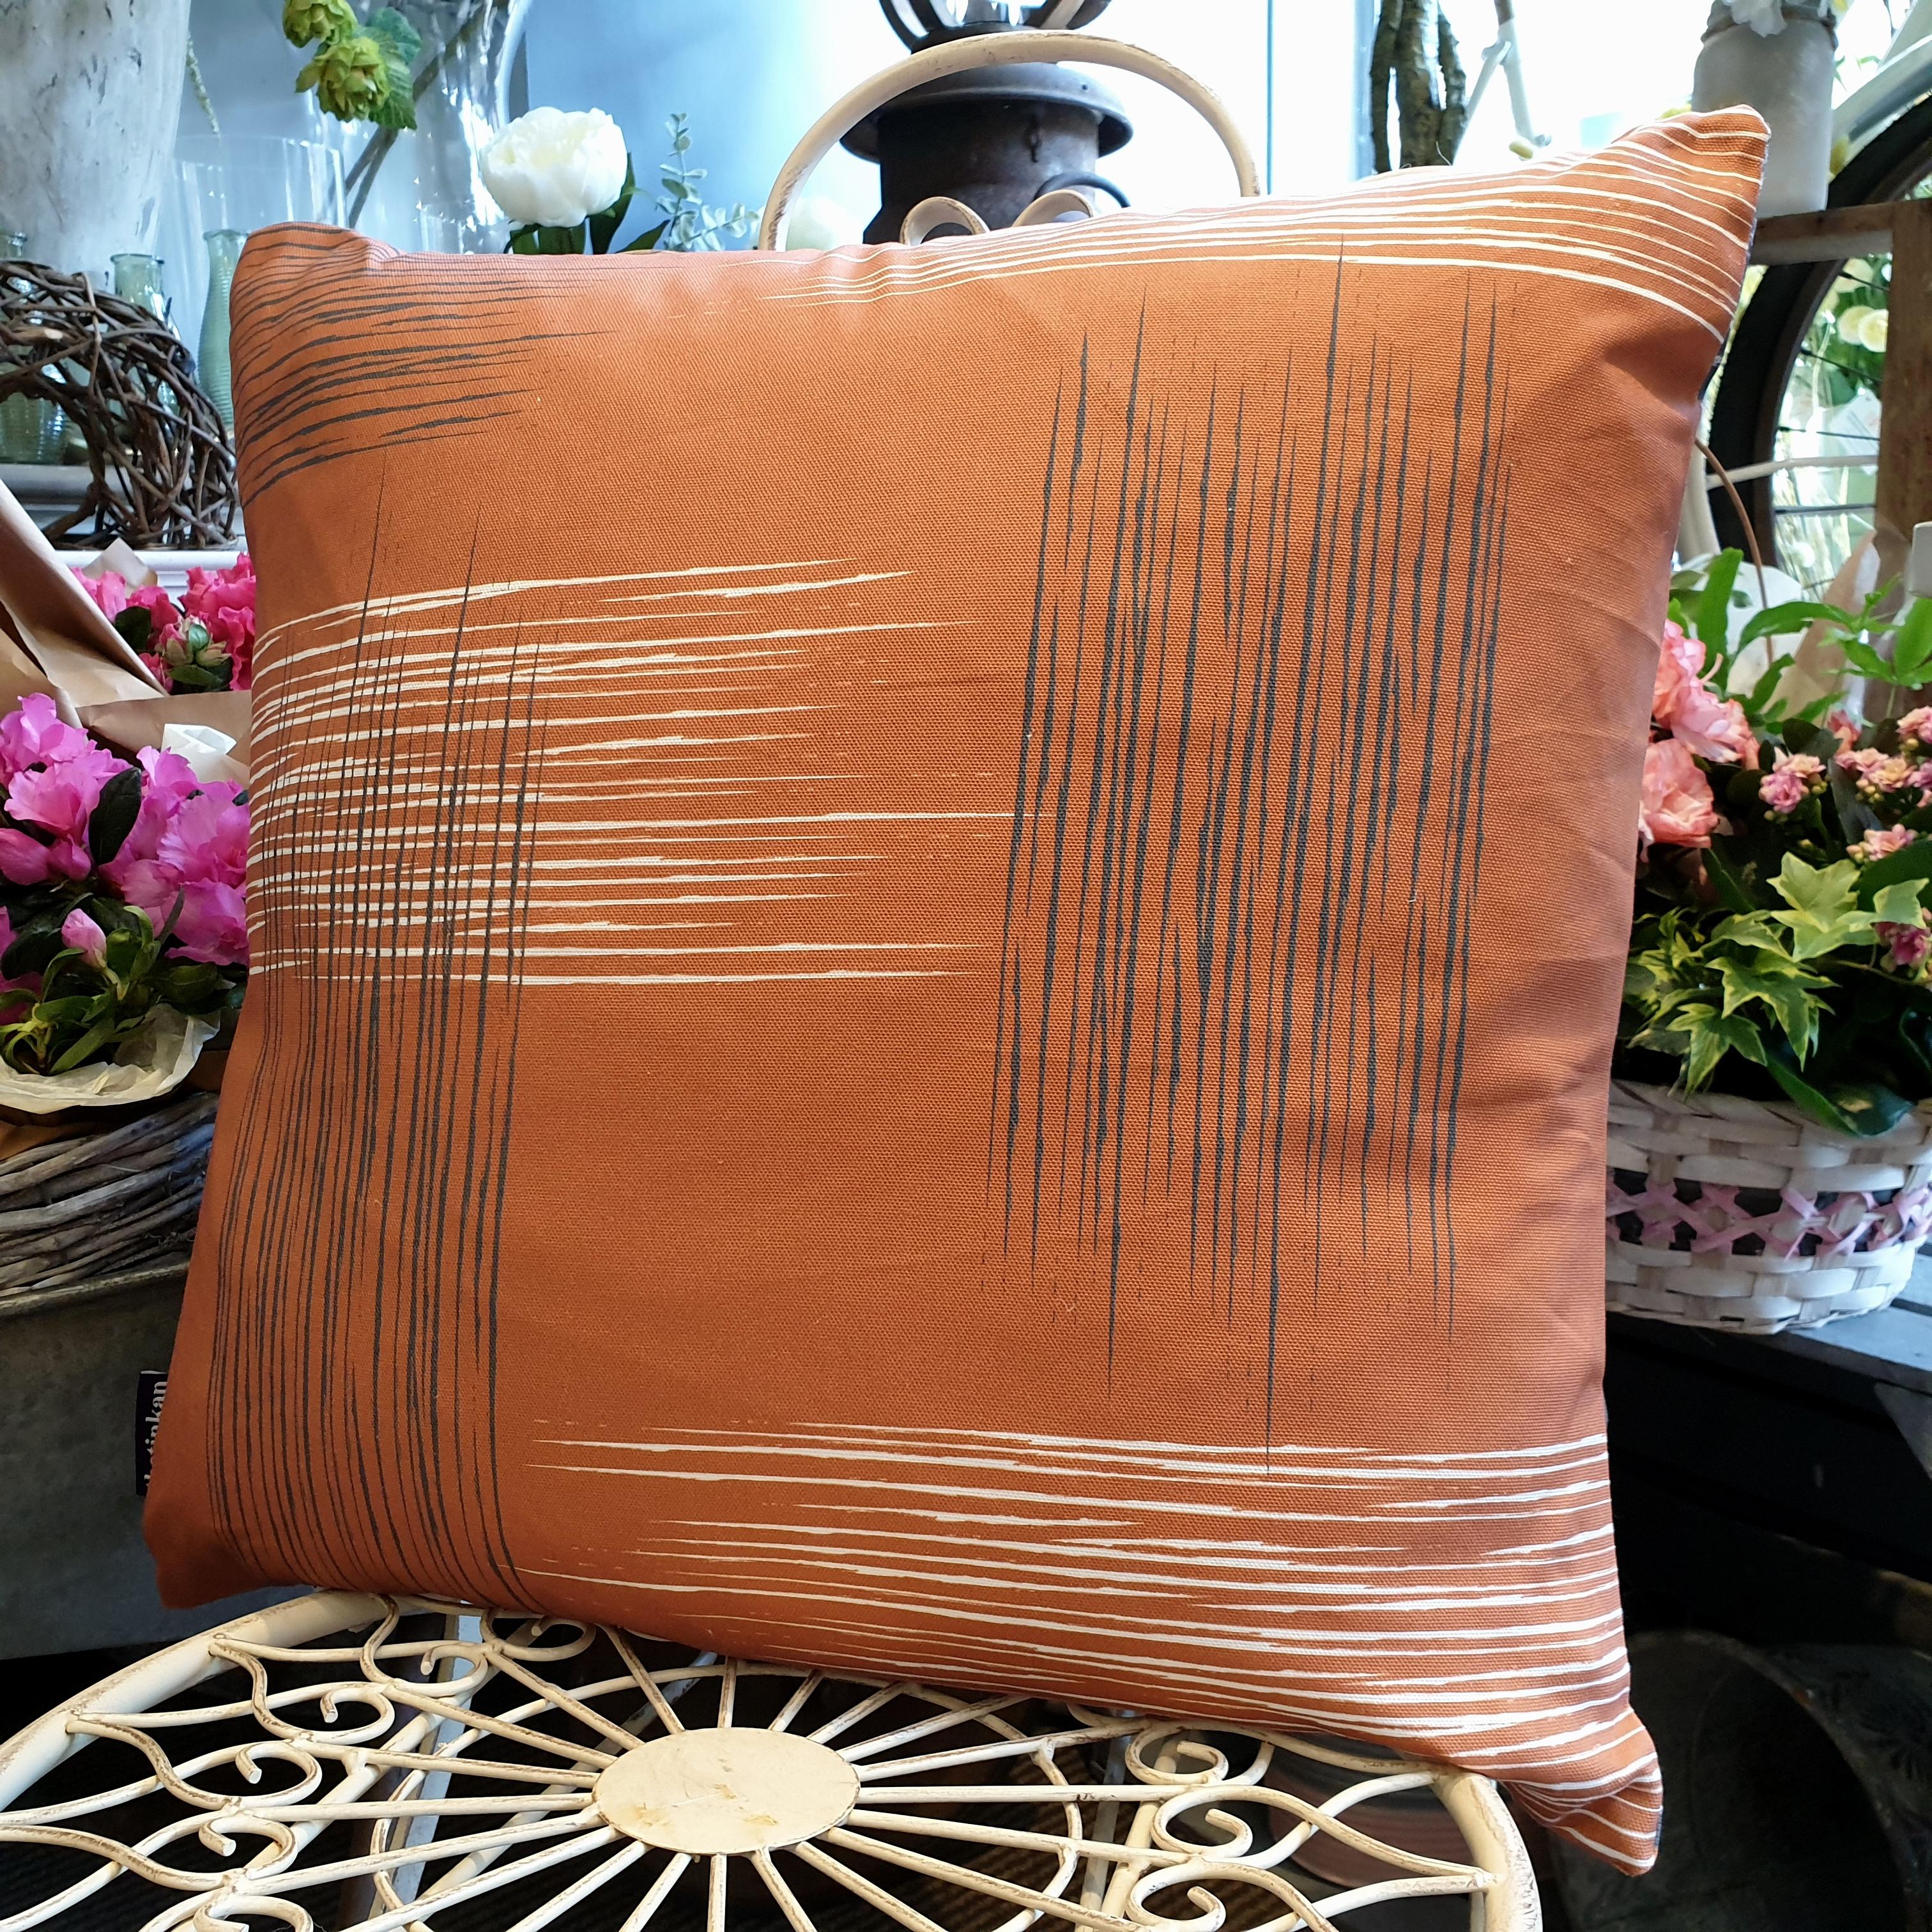 Double-sided warm rust orange 51cm square retro themed cushion with artistic grey and white shards designed by thetinkan. Available with an optional luxury cushion inner pad. VIEW PRODUCT >>